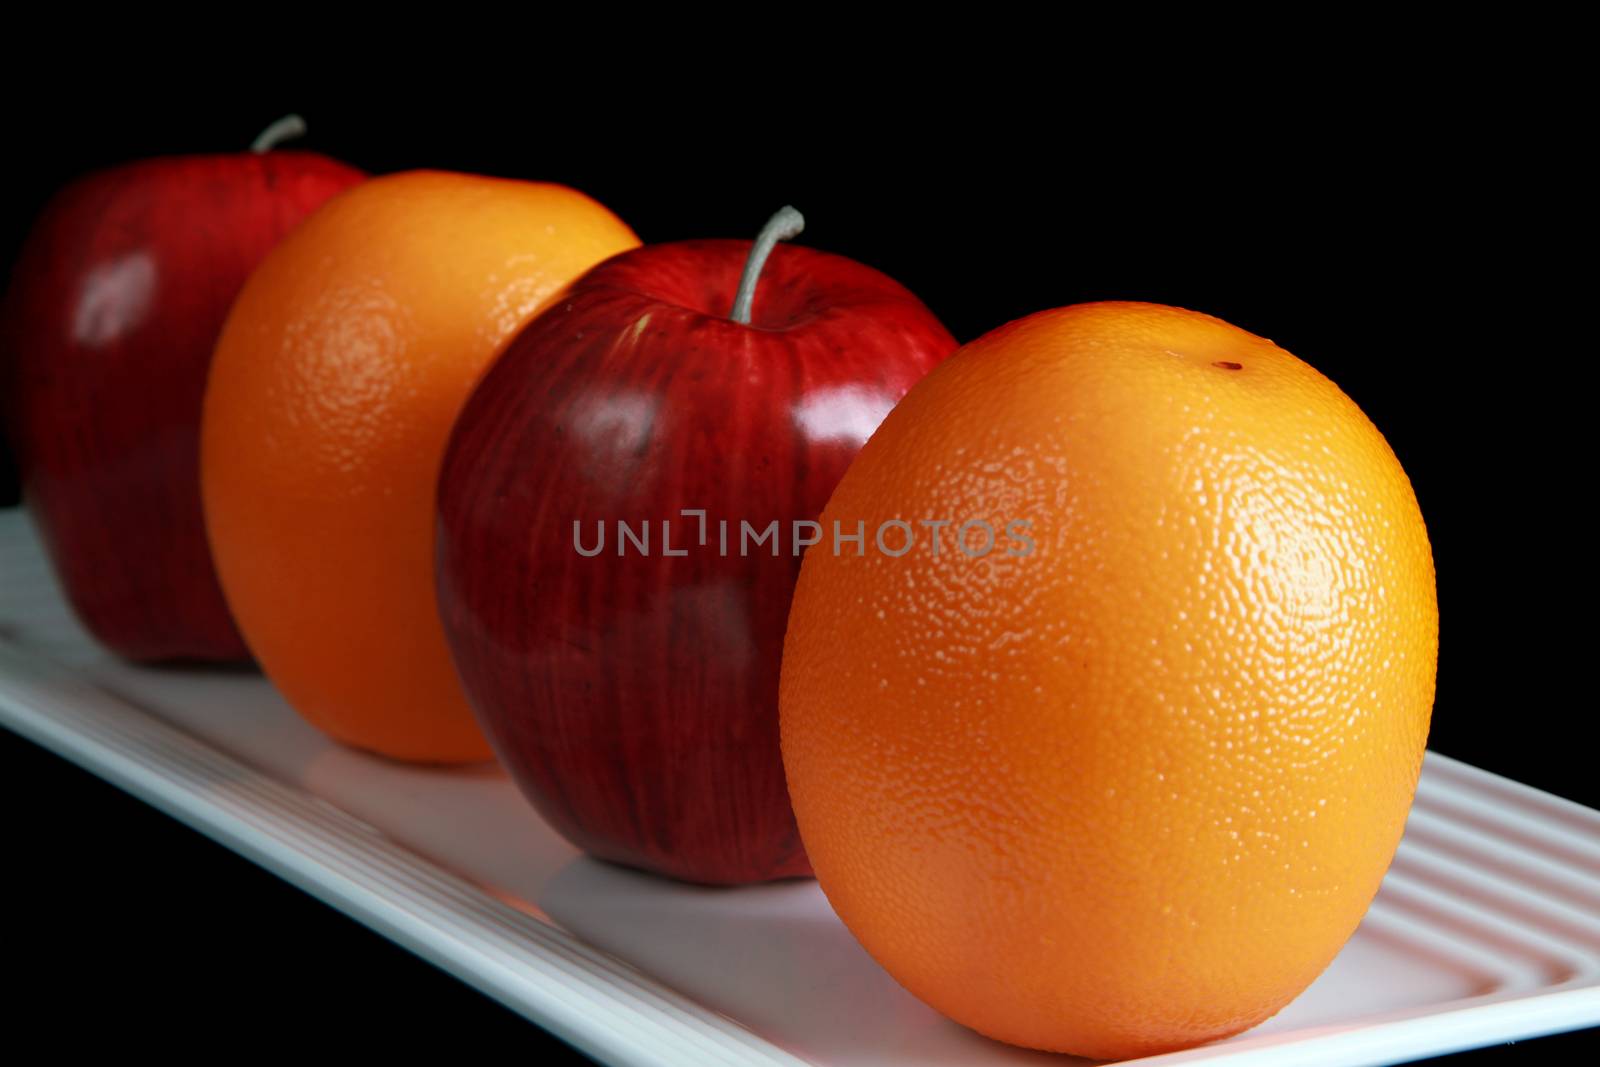 Apples and oranges in a line. by jimmartin